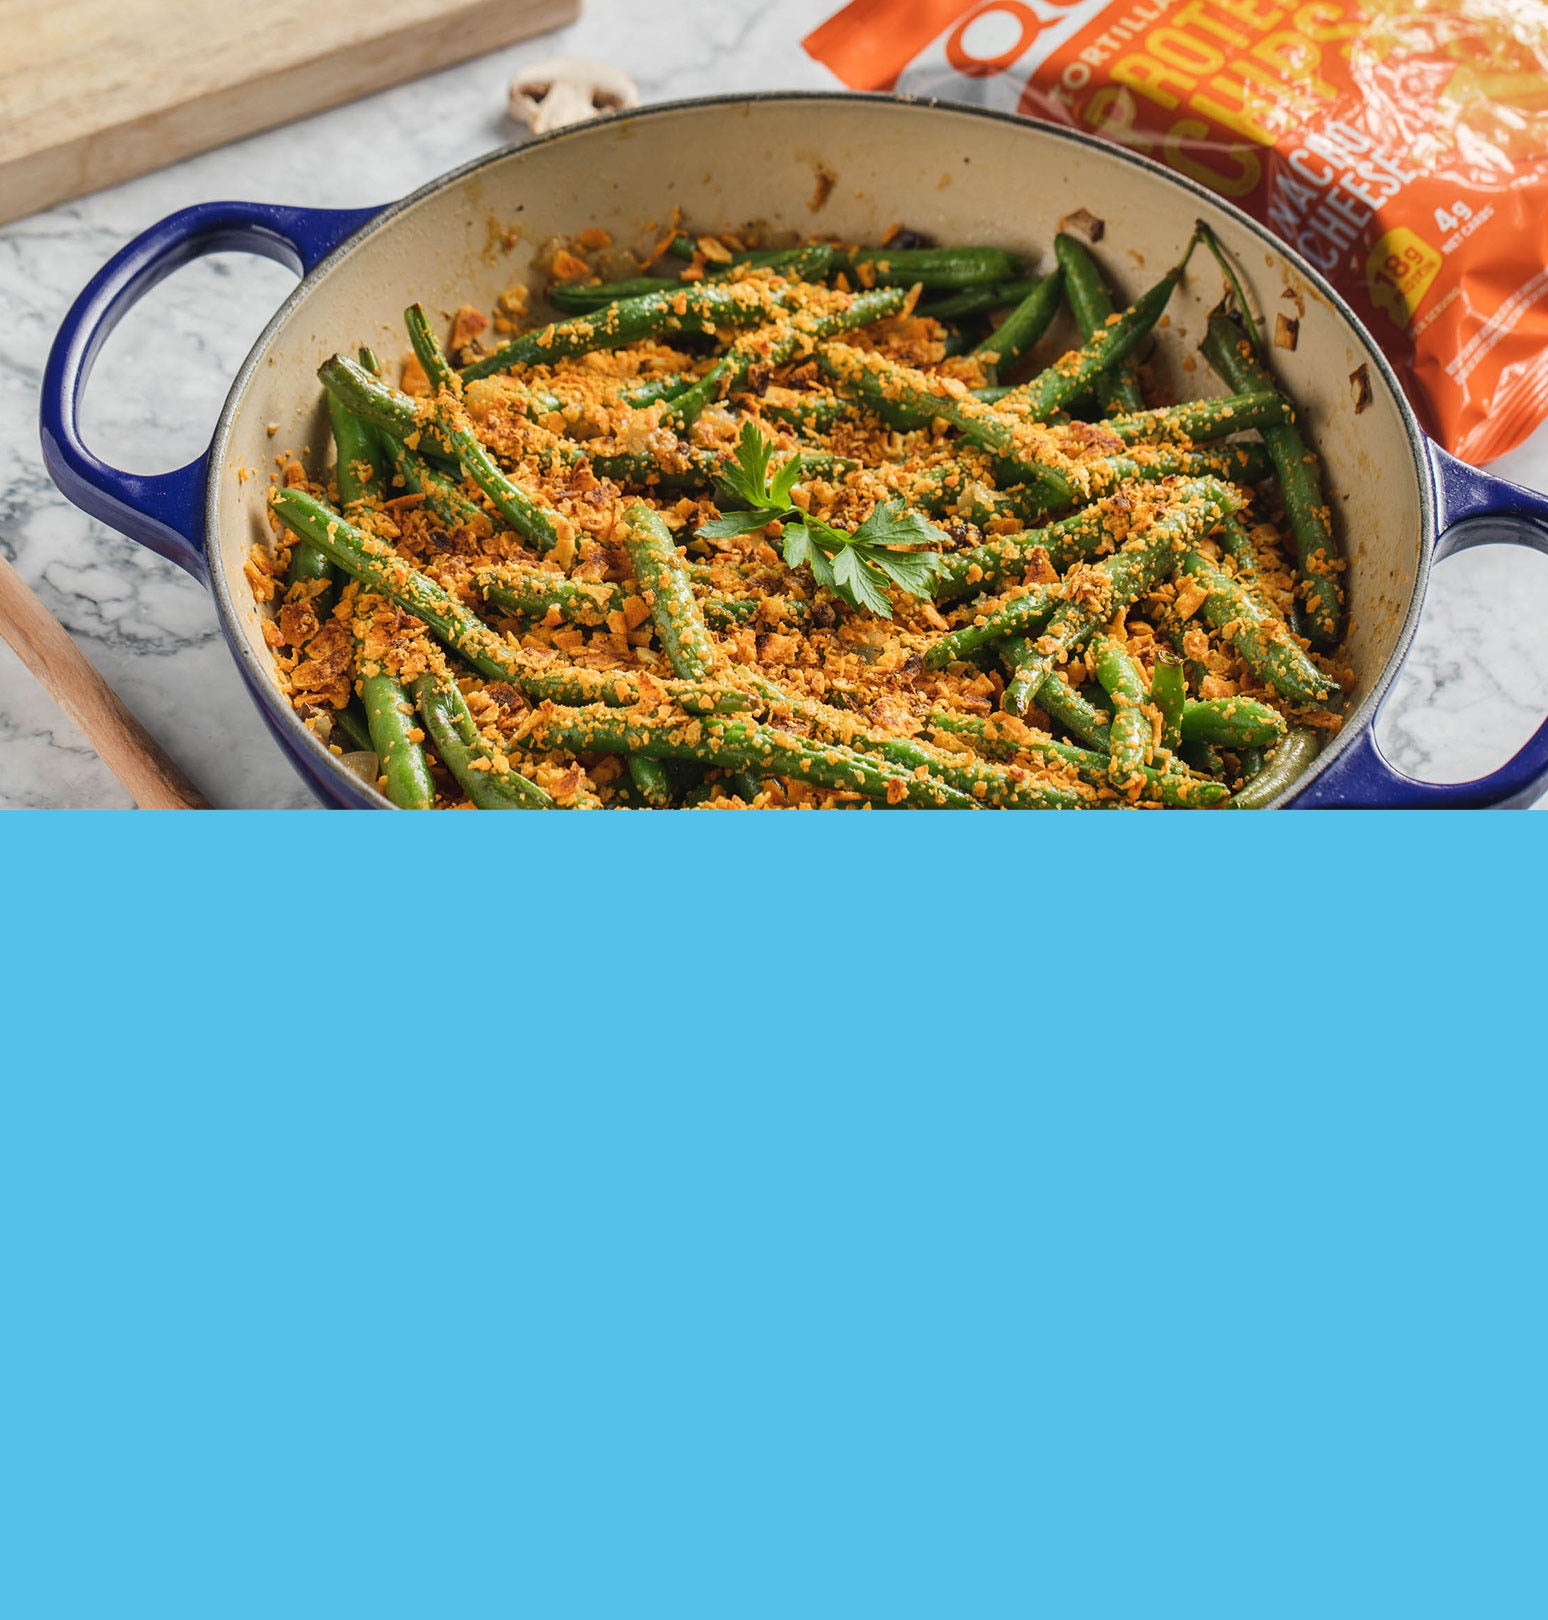 Green Bean Casserole with Quest tortilla protein chips. Click for full recipe